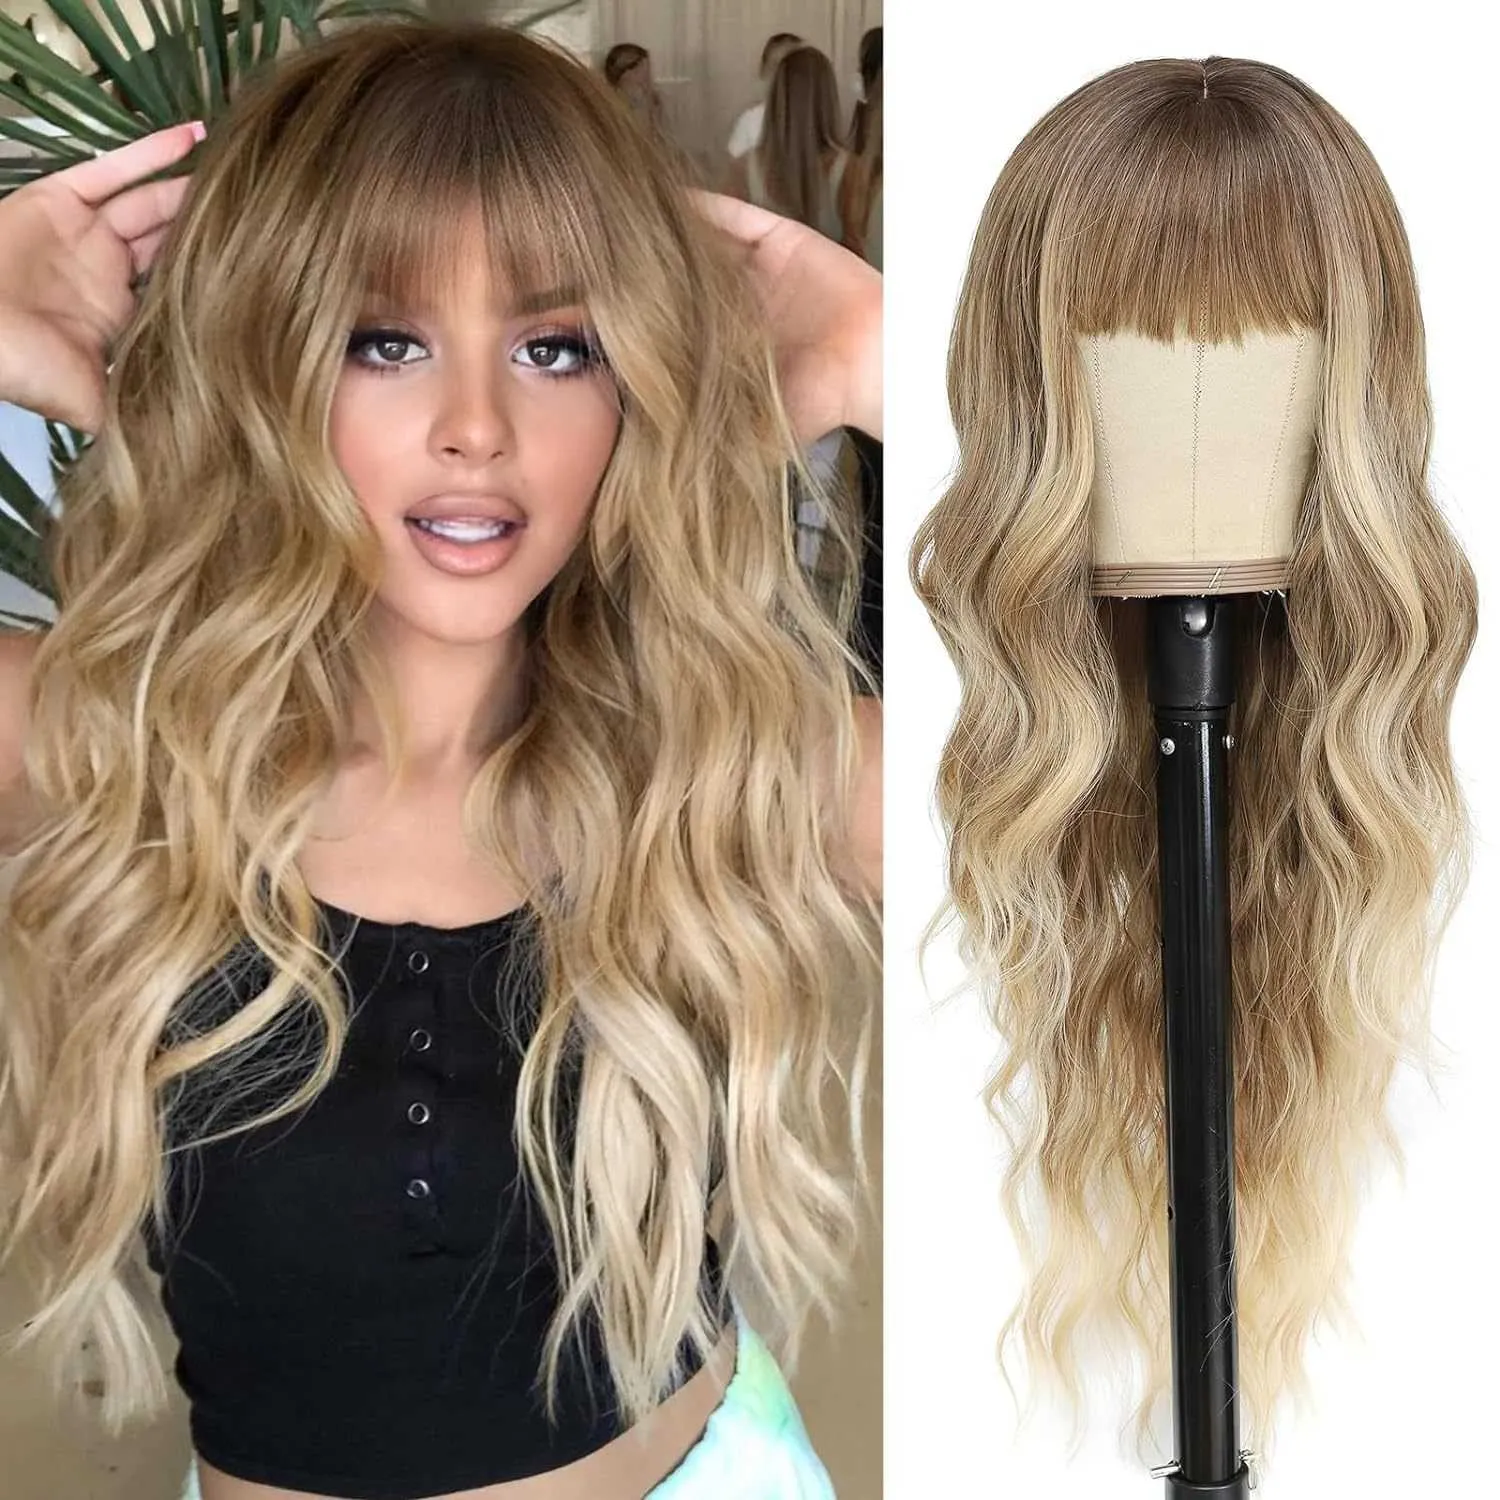 Synthetic Wigs tant Heat Elimination Wig with Straight Bangs Large Wav Long Curly Hair Synthetic Fiber Headband Wig